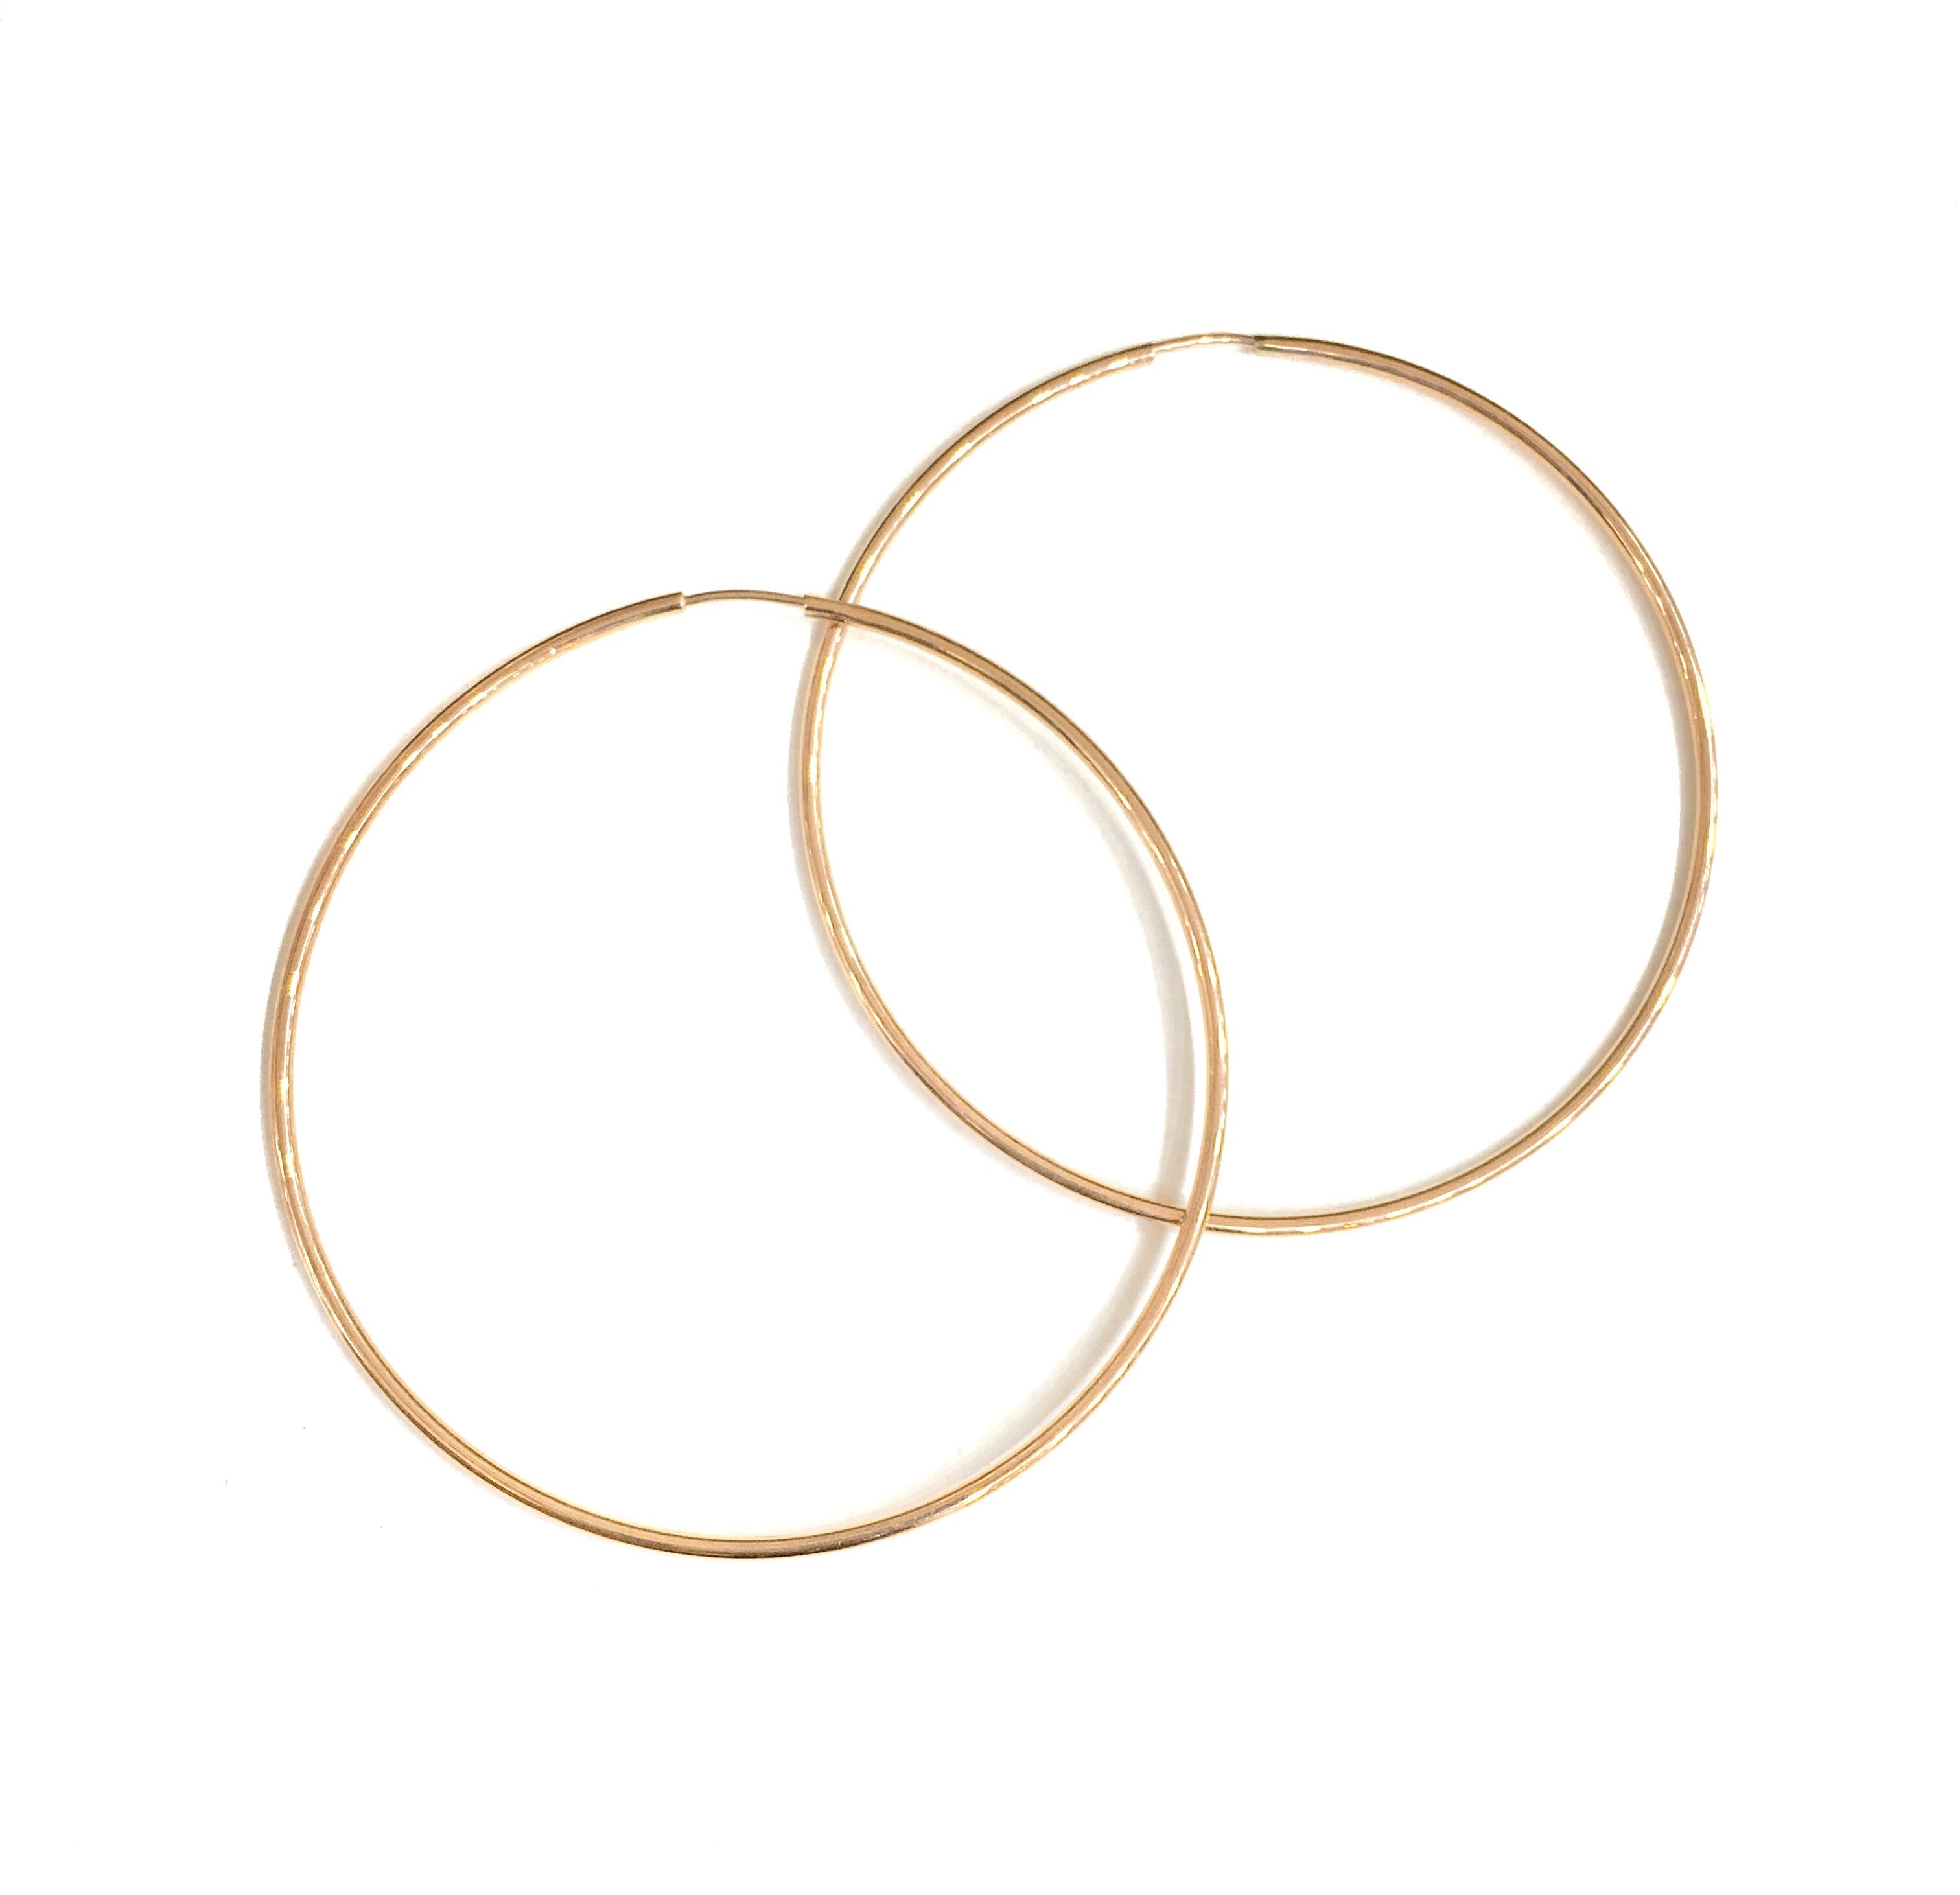 14K YELLOW GOLD 2.3 INCH HOOPS 2MM